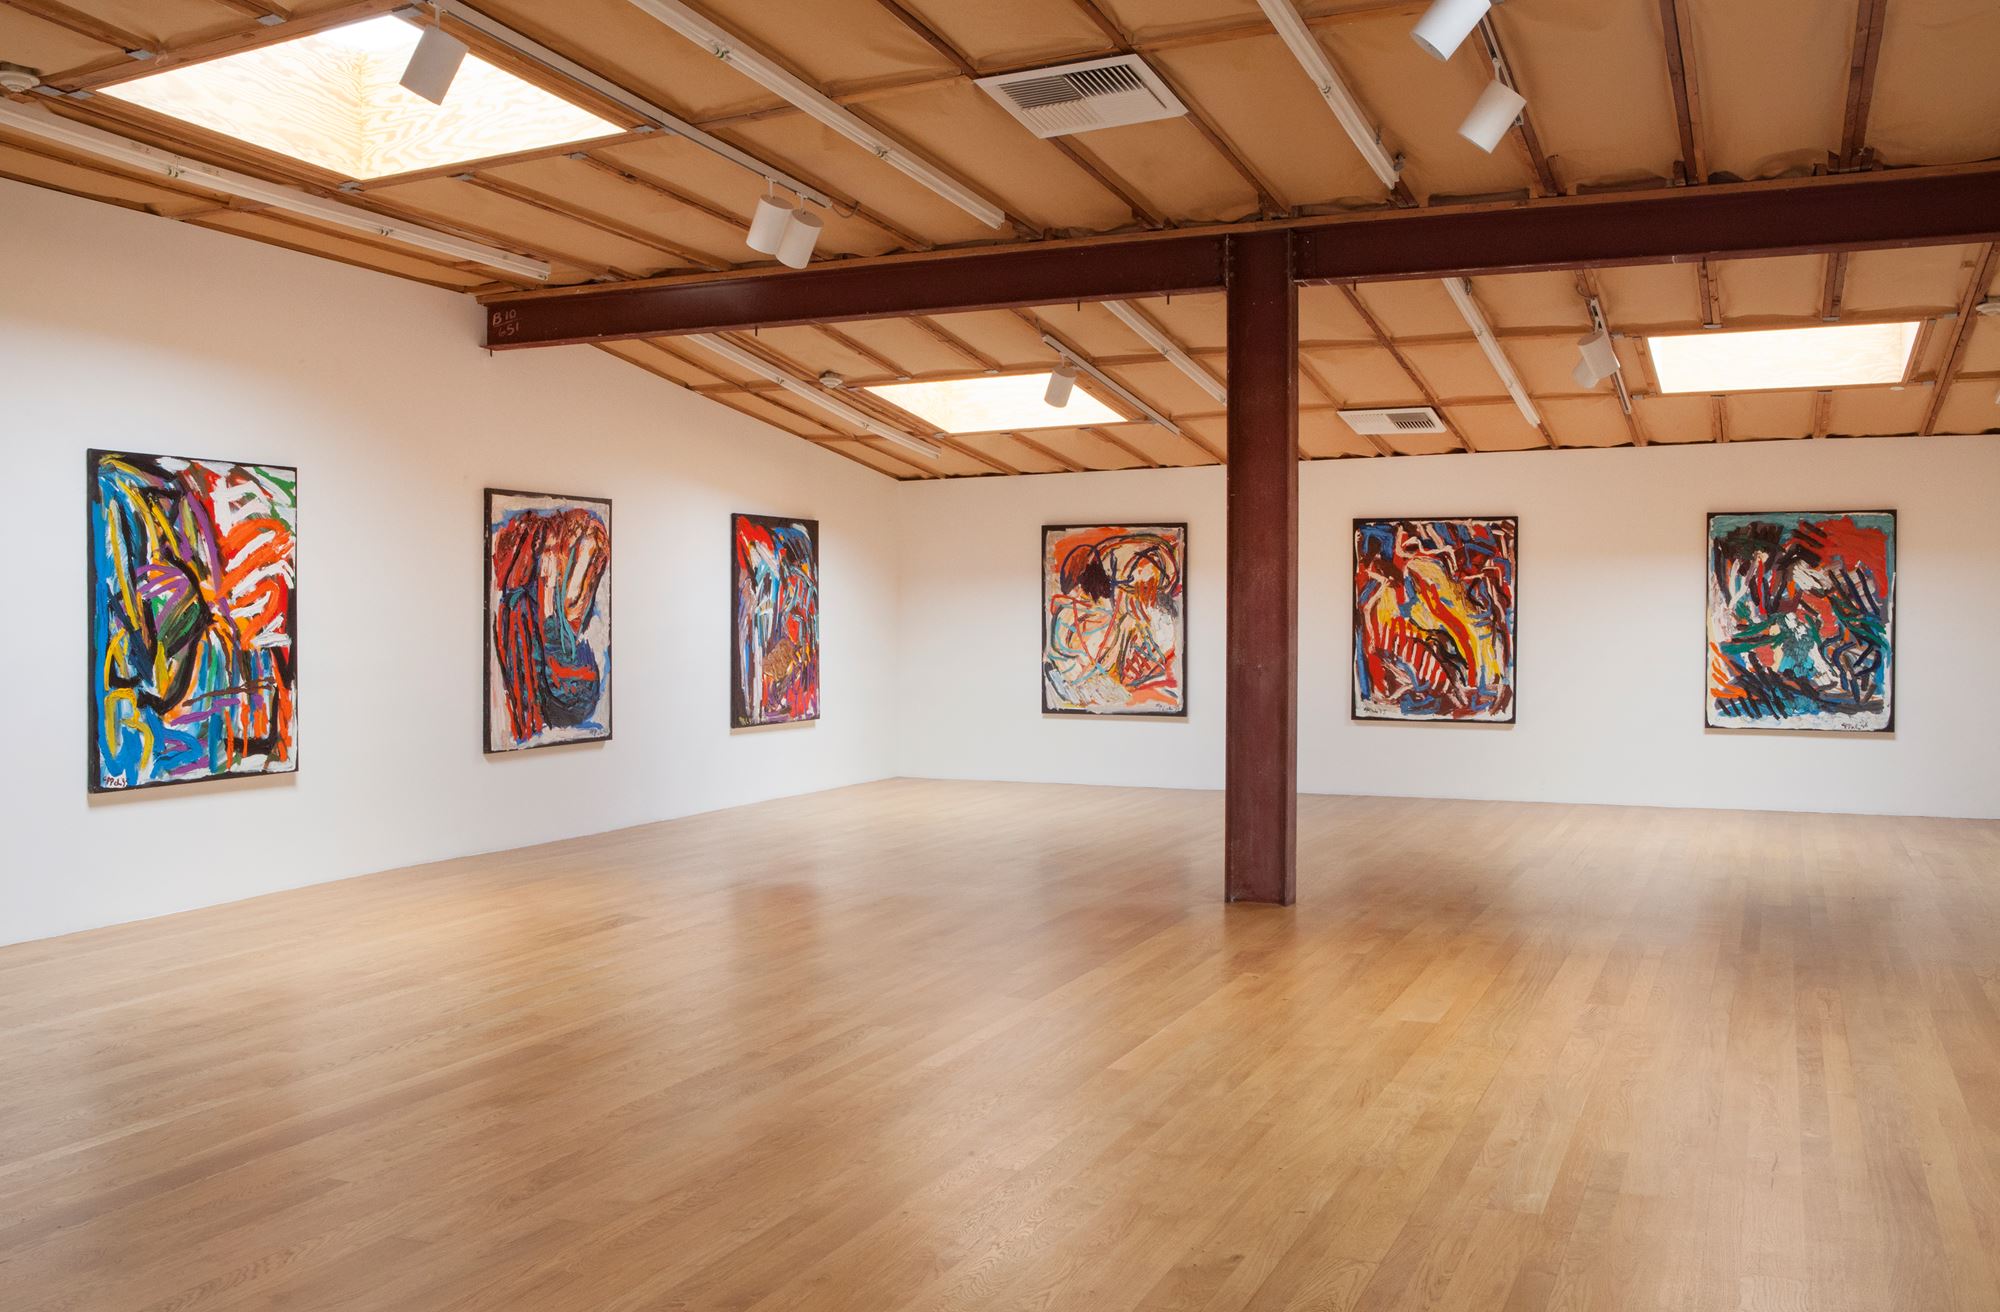 Karel Appel, 'Out of Nature' at Blum & Poe, Los Angeles, USA on 8 Sep ...